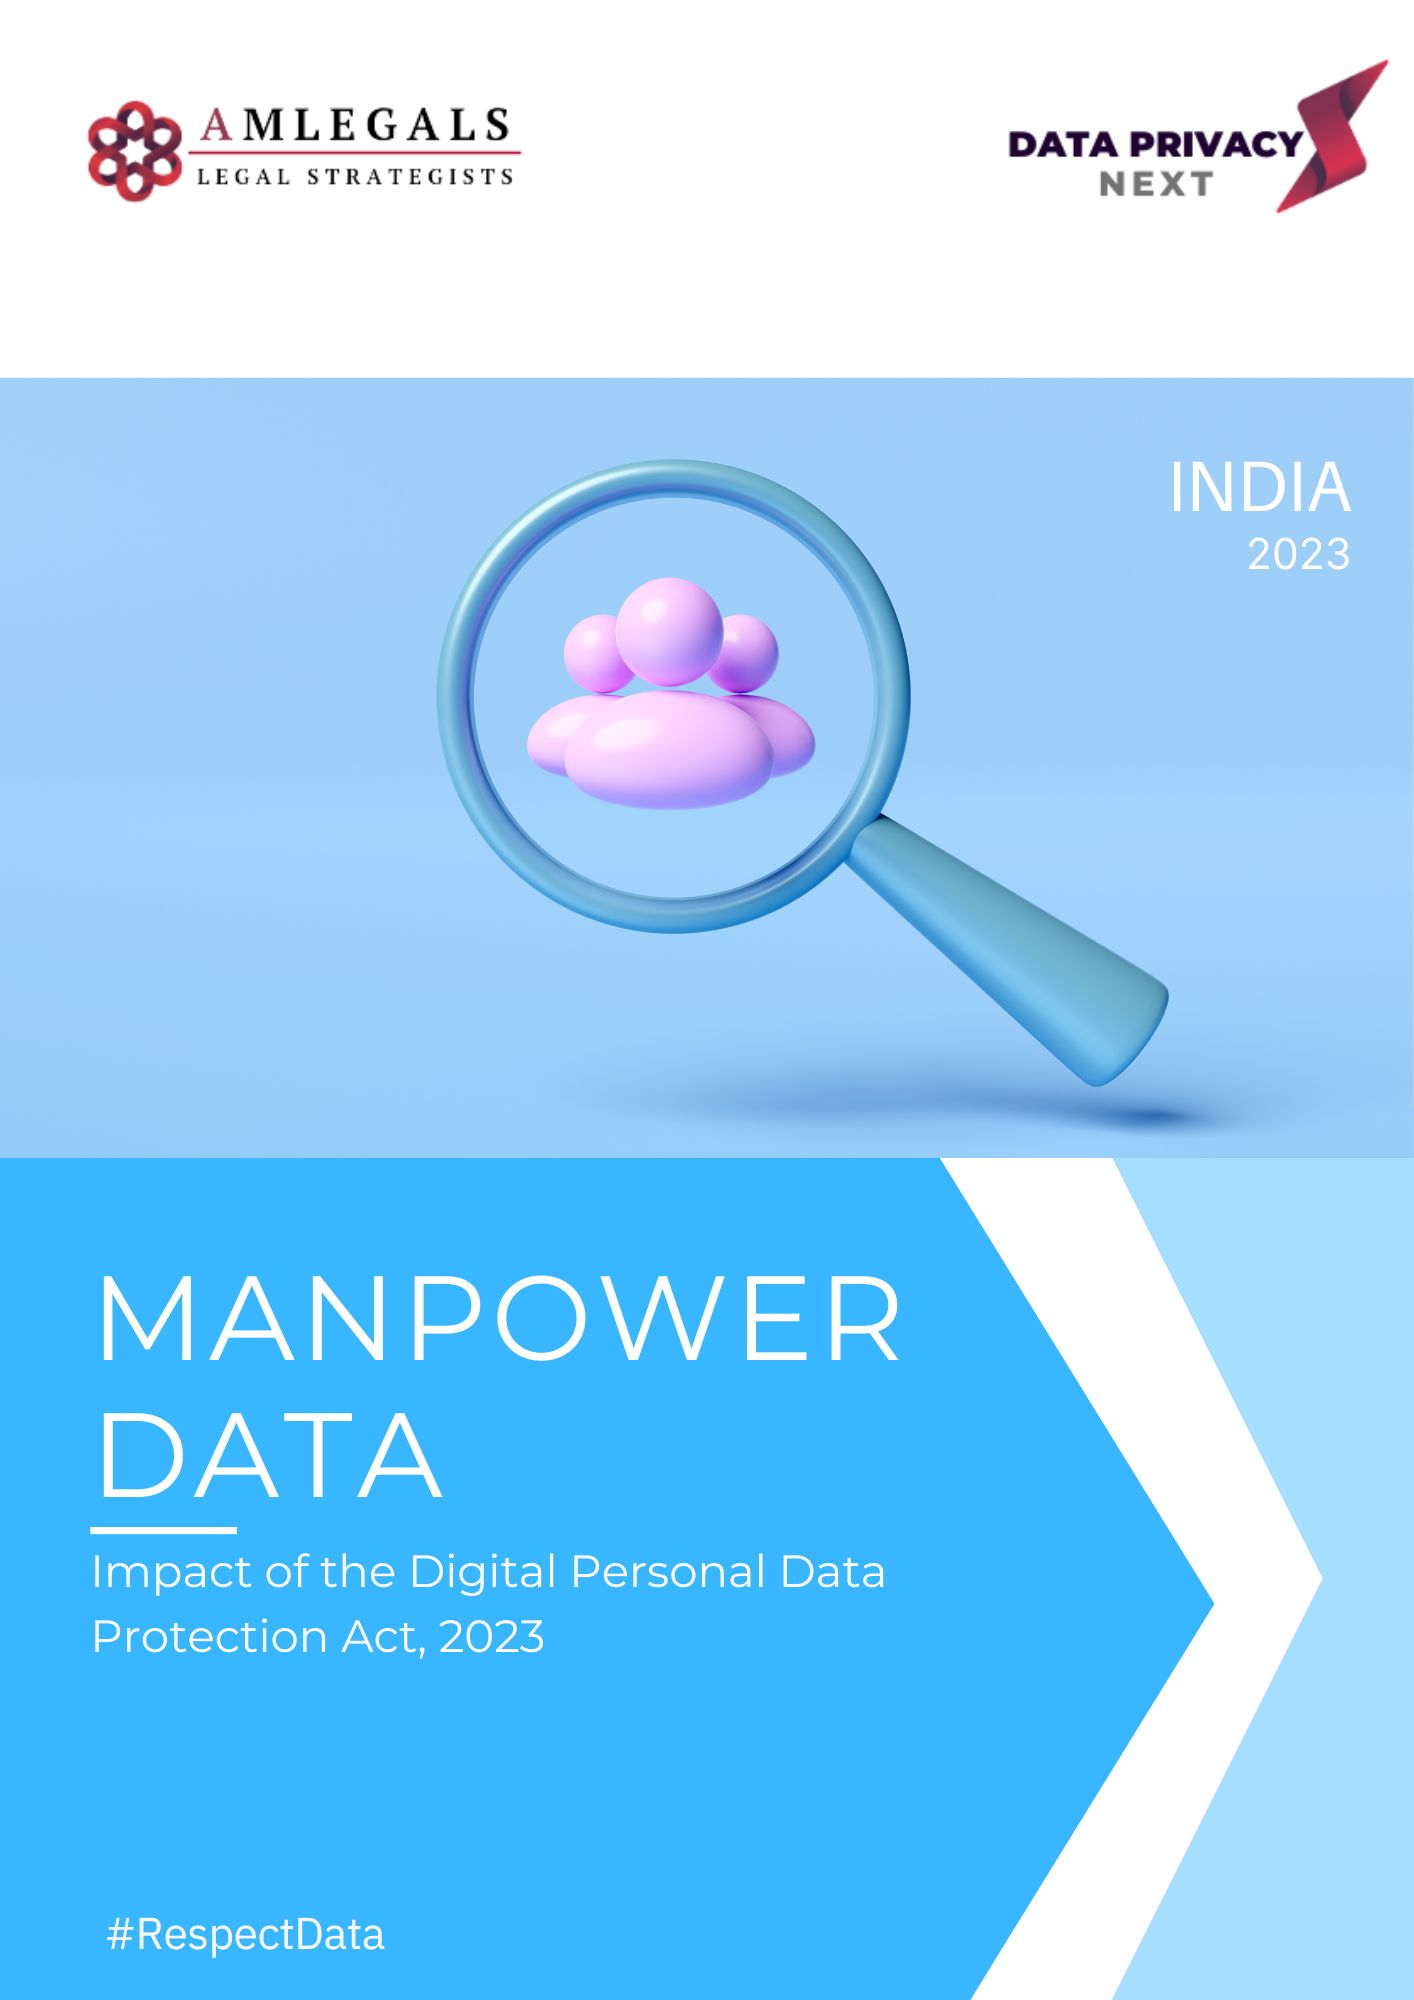 MAN POWER DATA - Impact of the Digital Personal Data protection Act, 2023